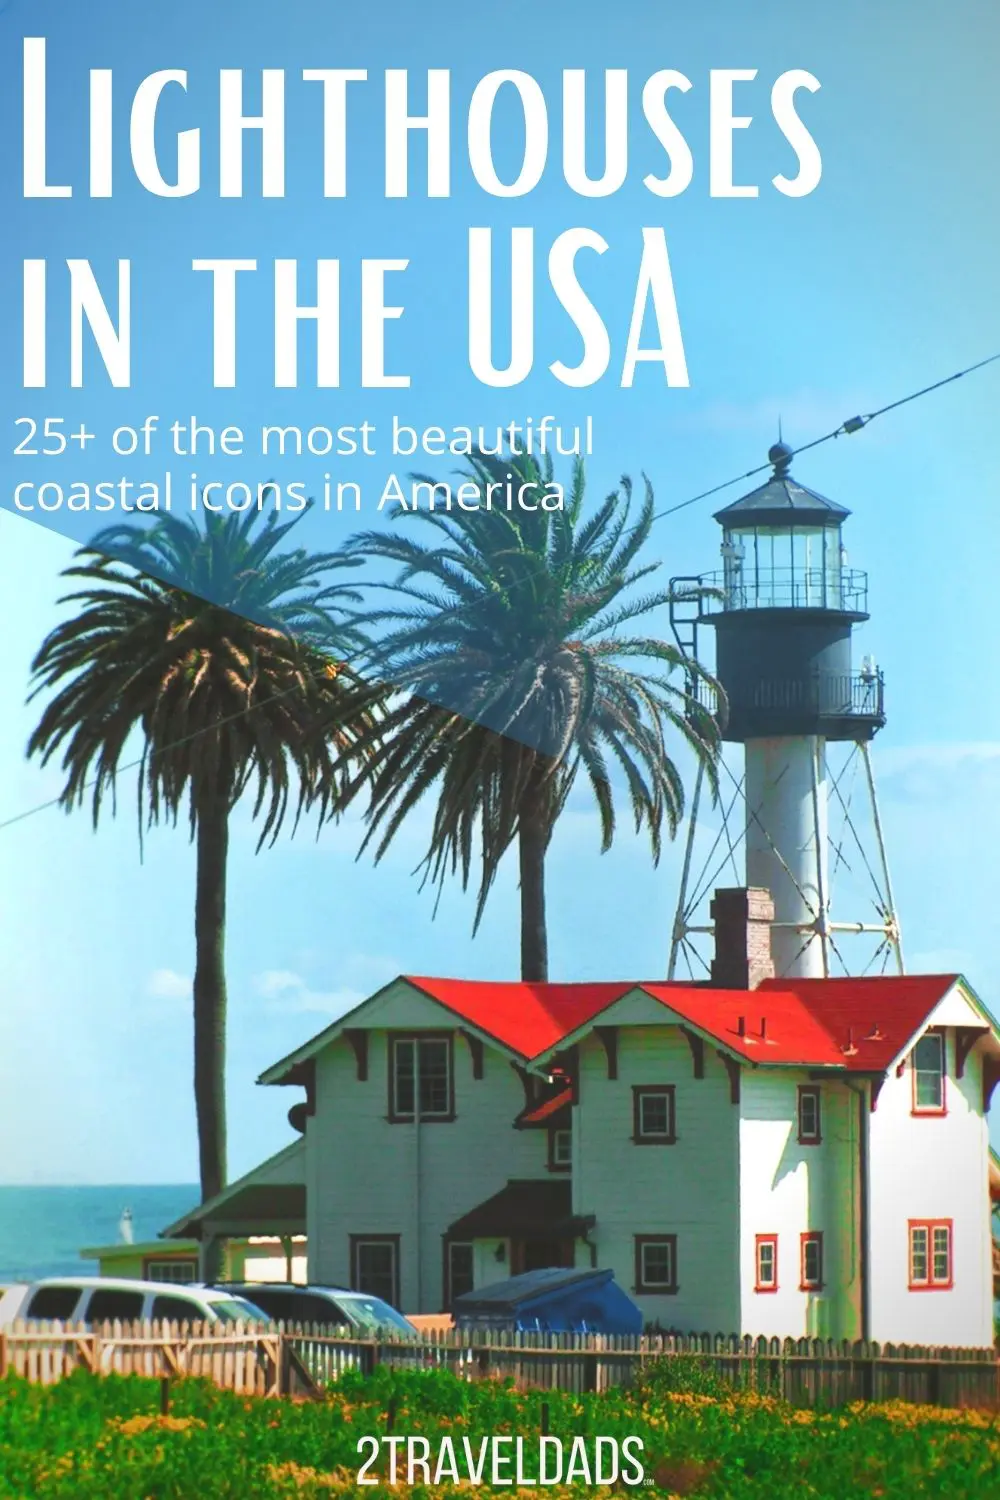 There are more than 100 lighthouses in the USA. These picks are beautiful, easy to visit and make for picturesque road trip adventures, from the Florida Keys to the Oregon Coast.